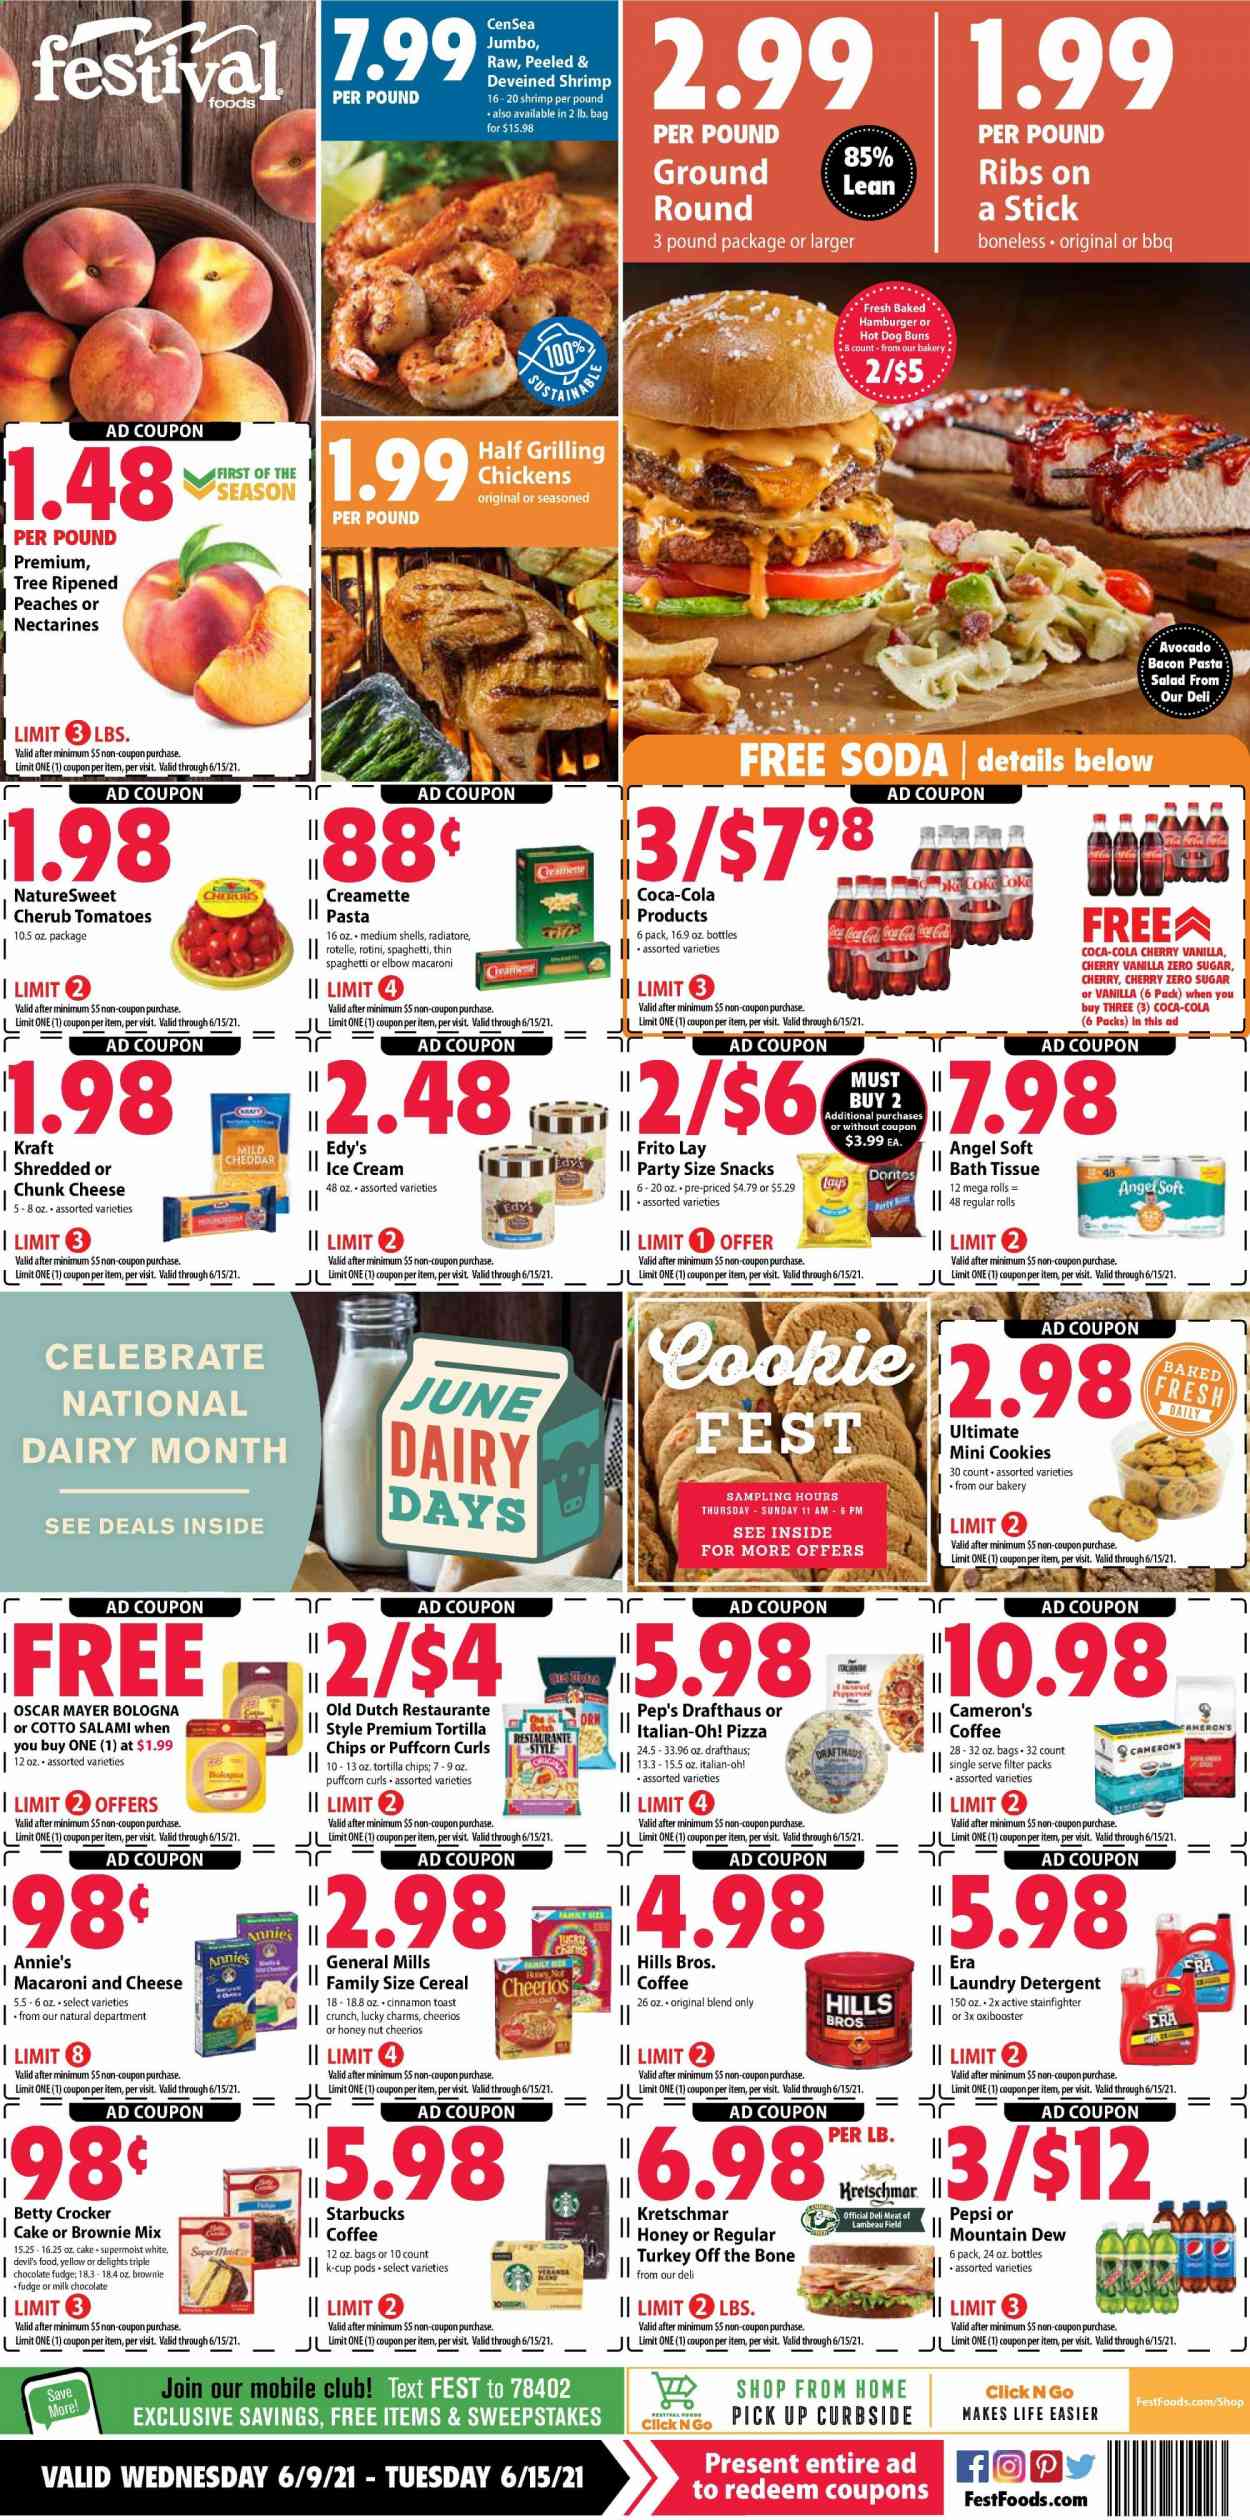 thumbnail - Festival Foods Flyer - 06/09/2021 - 06/15/2021 - Sales products - cake, buns, brownie mix, tomatoes, salad, avocado, cherries, shrimps, macaroni & cheese, spaghetti, pizza, pasta, Annie's, Kraft®, bacon, salami, bologna sausage, Oscar Mayer, pasta salad, mild cheddar, chunk cheese, ice cream, cookies, fudge, milk chocolate, snack, tortilla chips, chips, cereals, Cheerios, Creamette, cinnamon, Coca-Cola, Mountain Dew, Pepsi, soda, coffee, Starbucks, coffee capsules, K-Cups, bath tissue, detergent, laundry detergent, nectarines, peaches. Page 1.